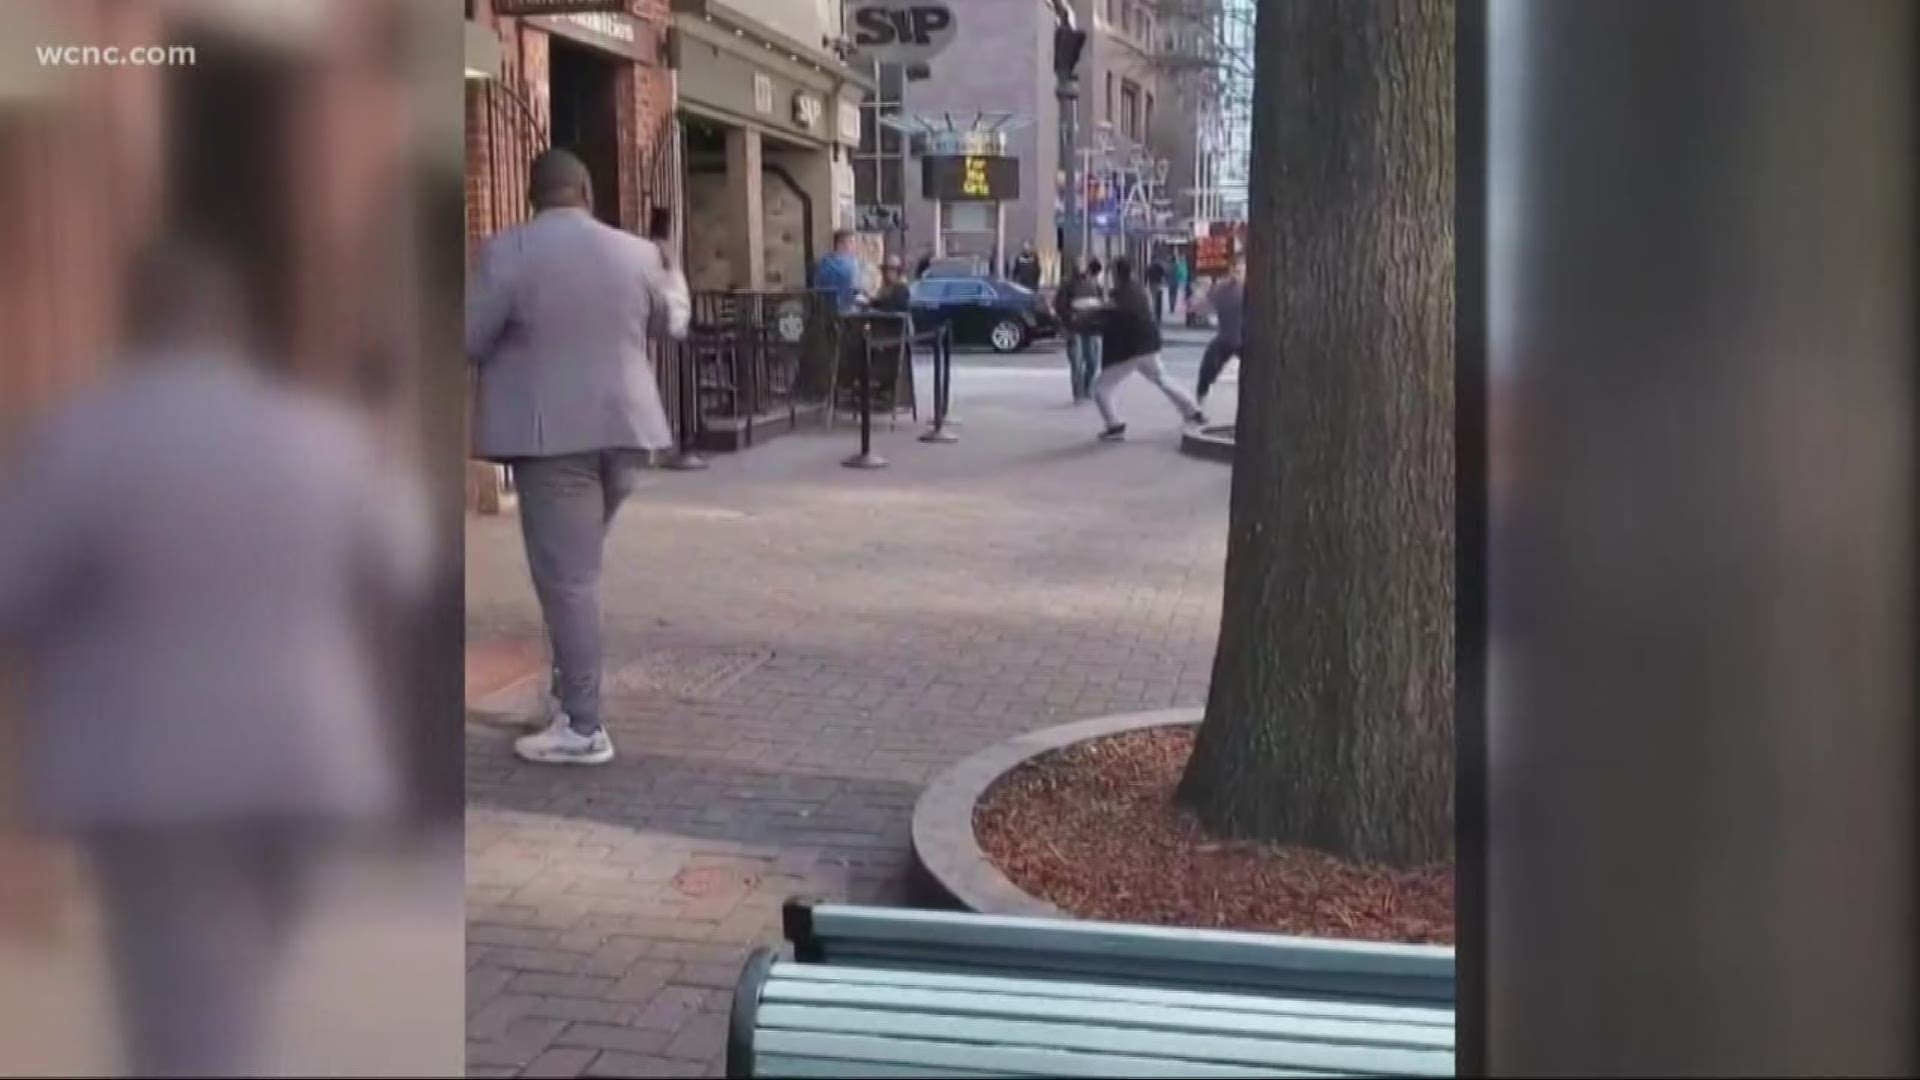 A Saturday afternoon in uptown Charlotte turned into an unexpected street fight and police say one person’s weapon of choice was a shovel.